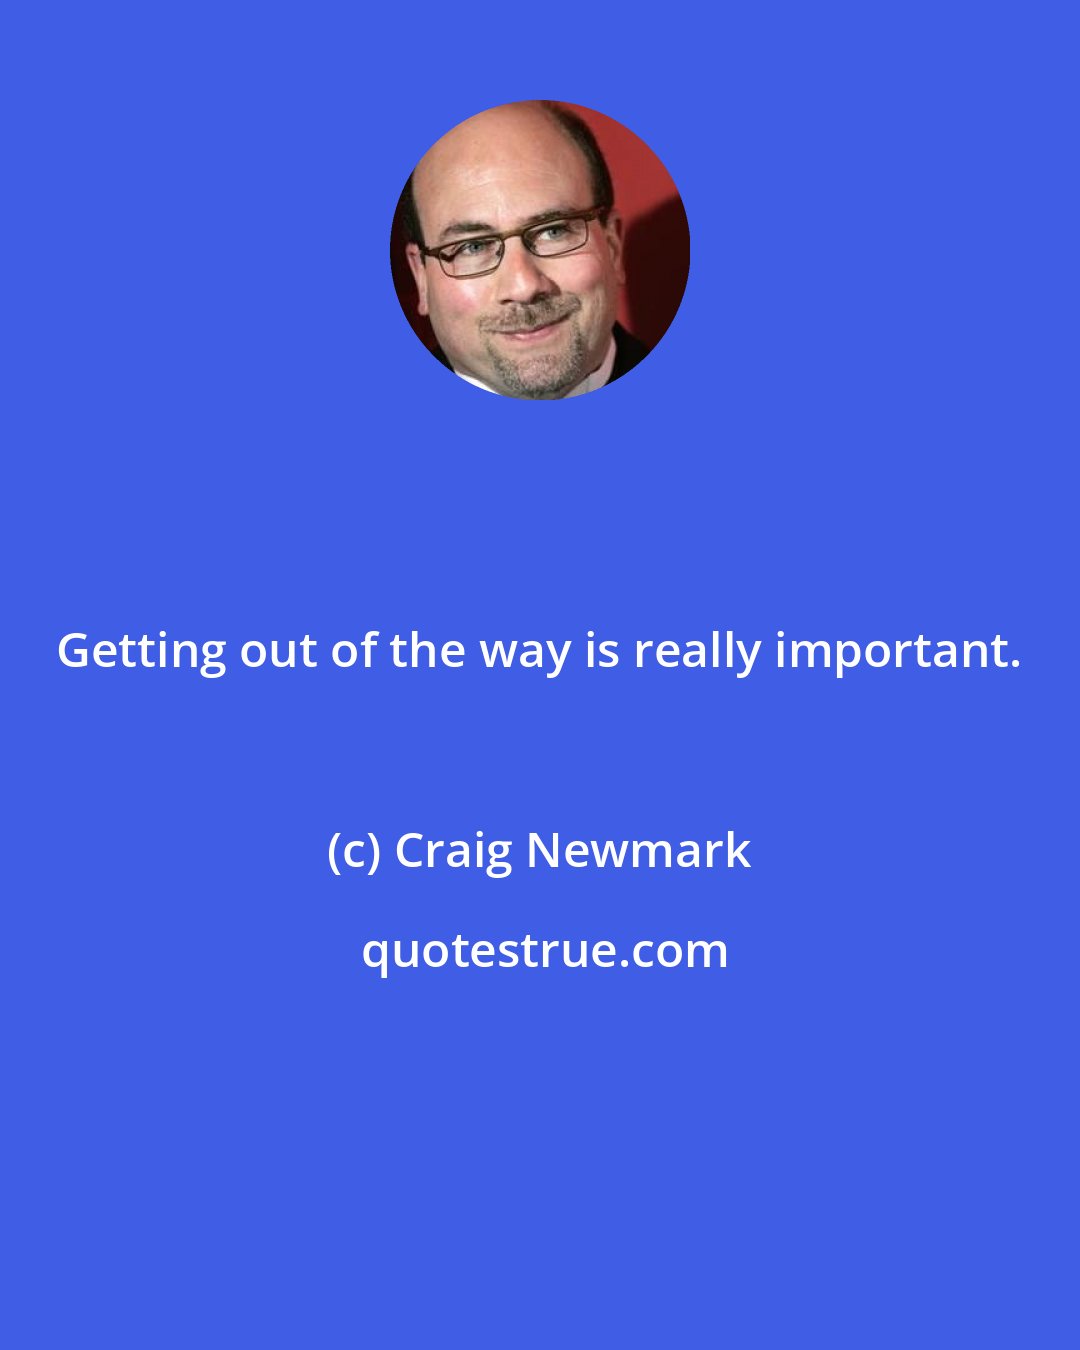 Craig Newmark: Getting out of the way is really important.